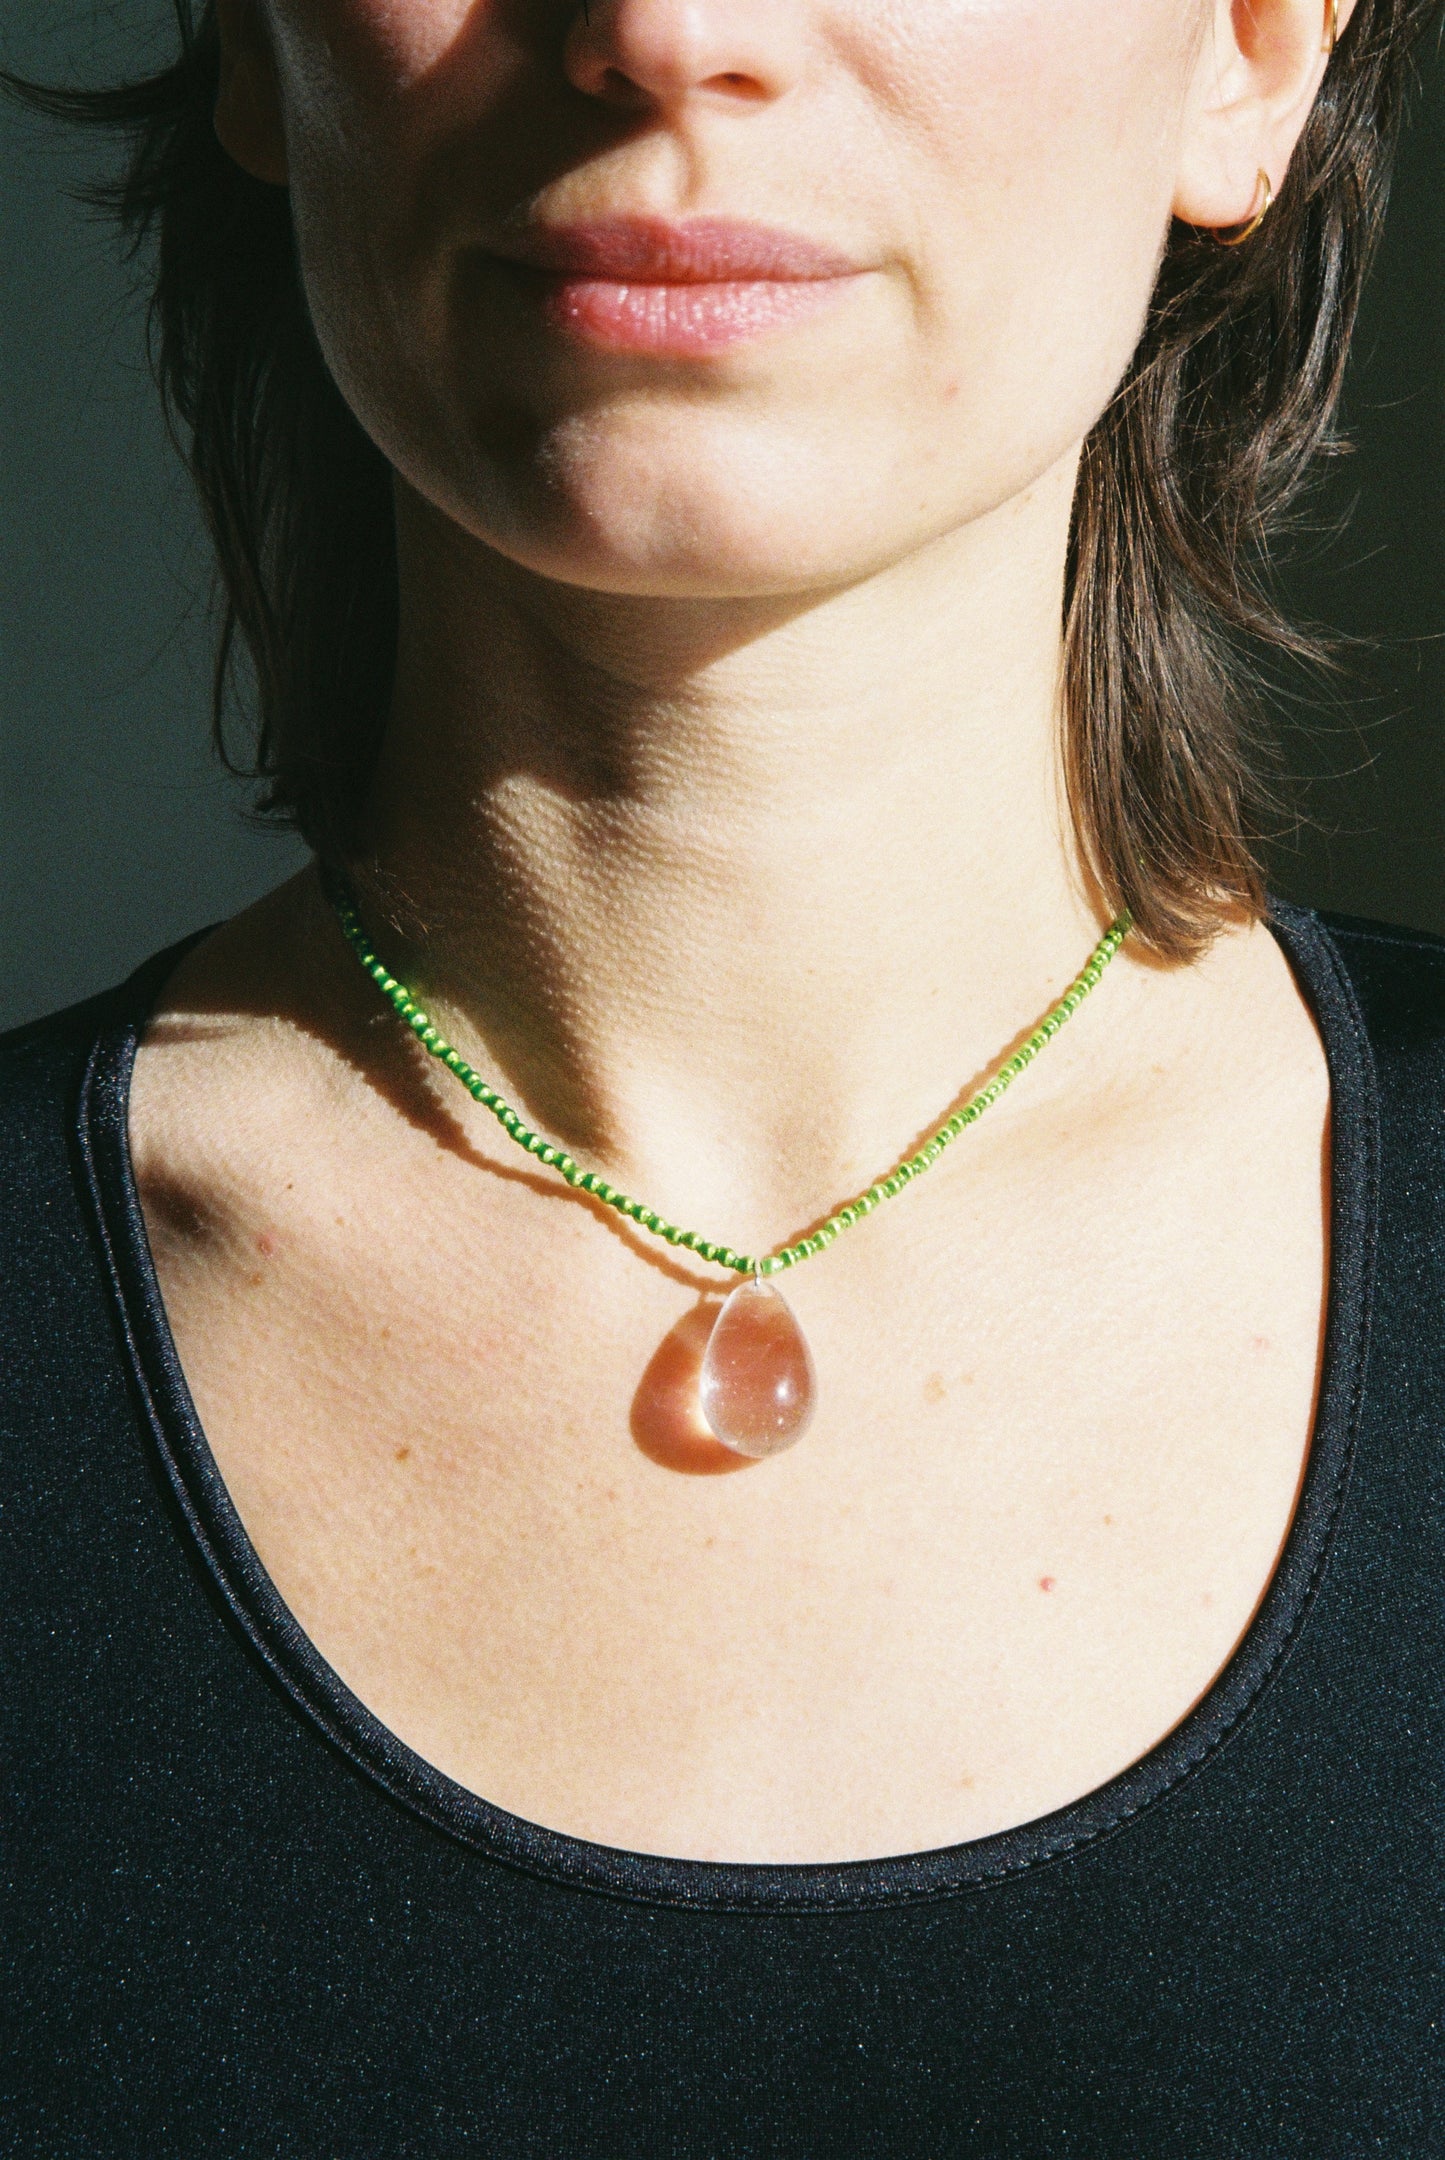 Arch necklace - Green / Clear